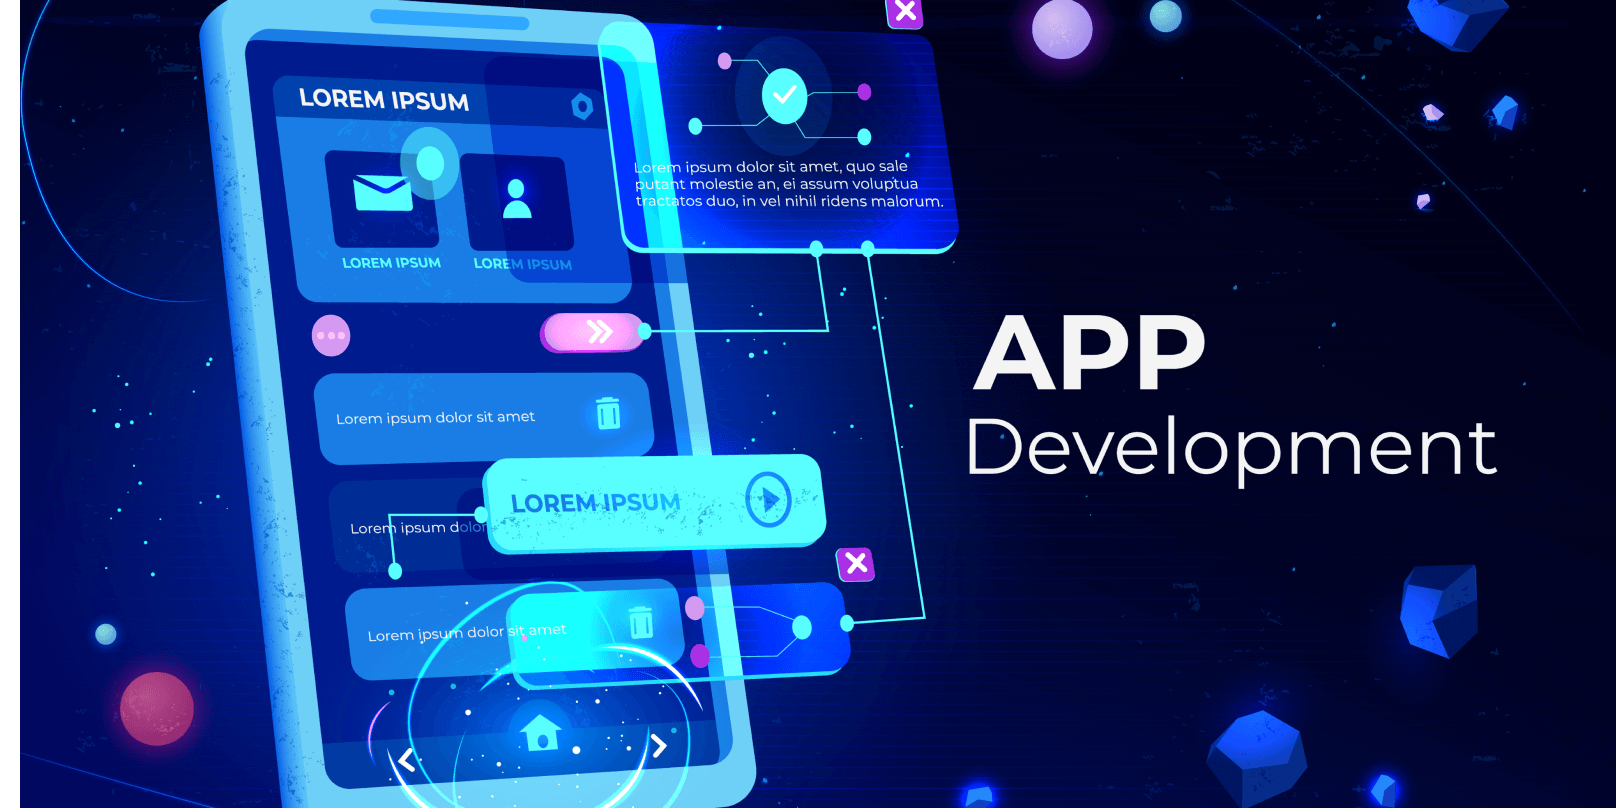 App Answers: How Do I Start Developing Mobile Apps?